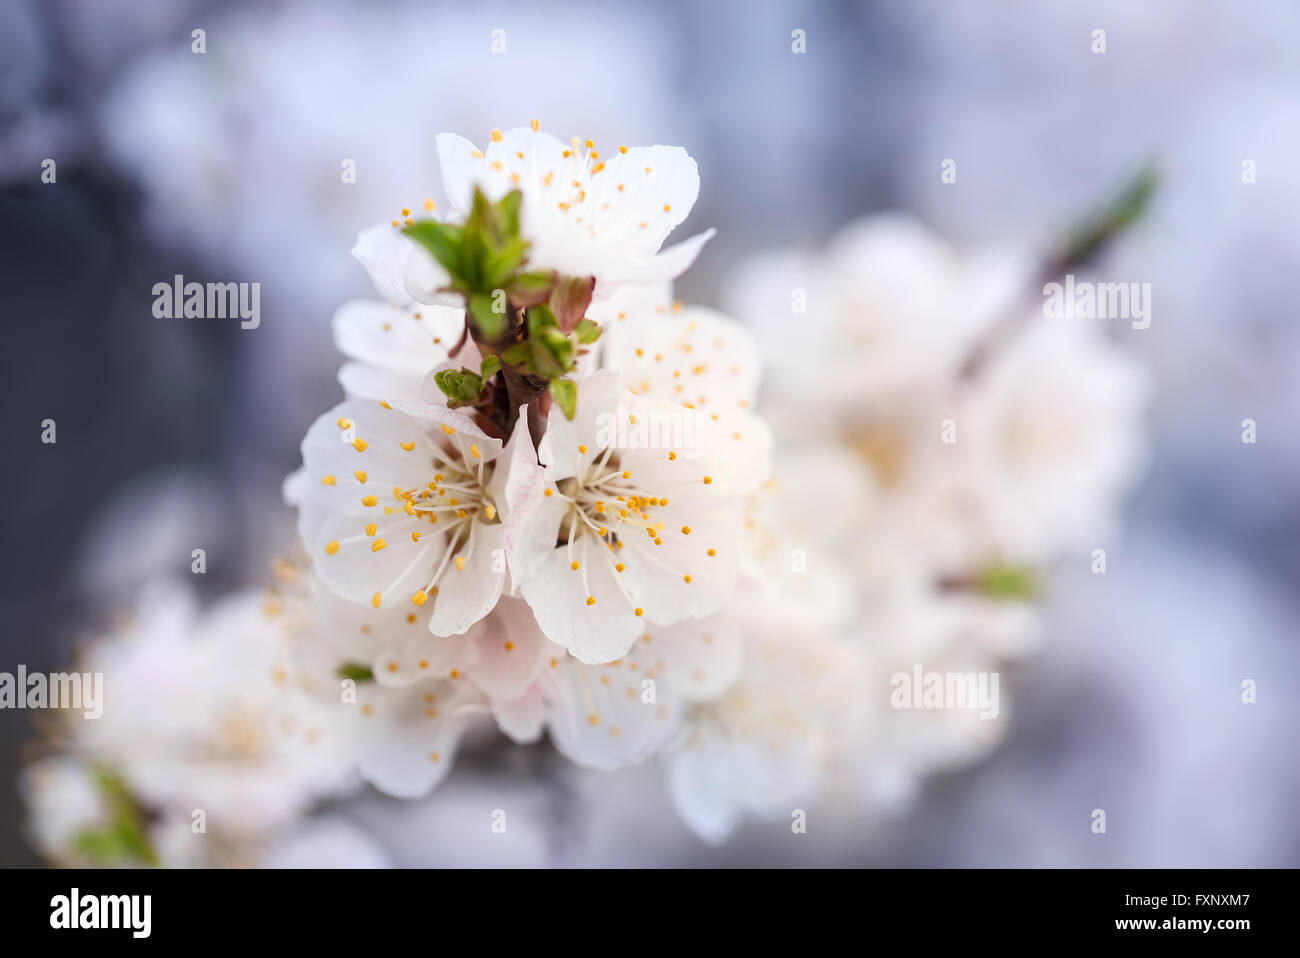 Flowering apricot shot with blurred background Stock Photo - Alamy